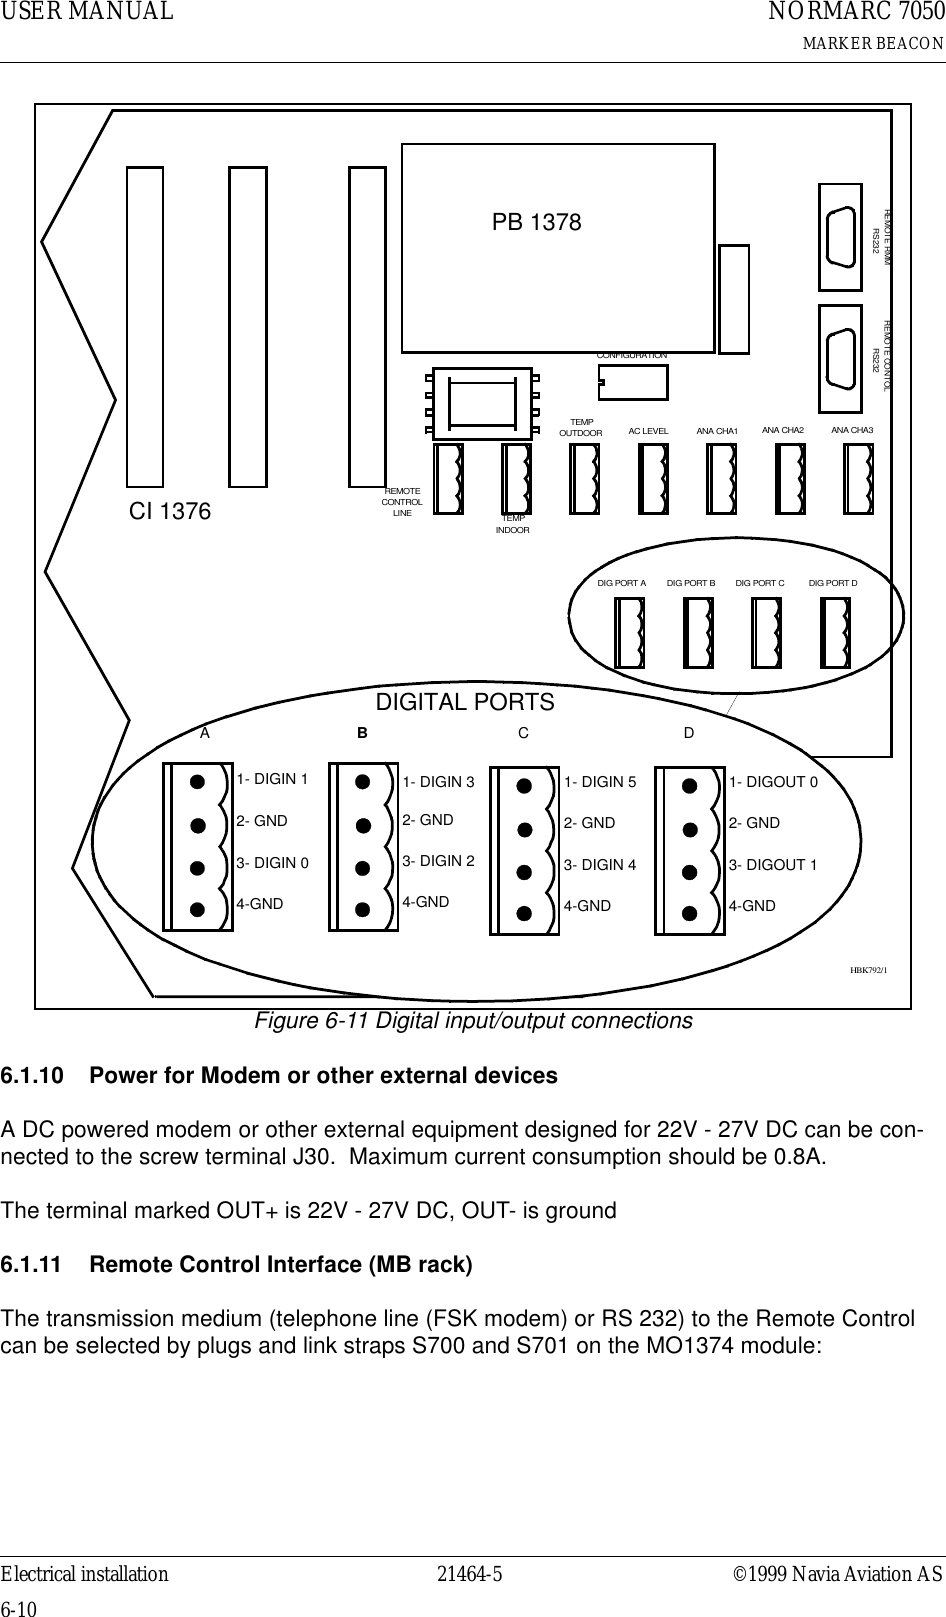 USER MANUAL6-1021464-5NORMARC 7050MARKER BEACONElectrical installation ©1999 Navia Aviation ASFigure 6-11 Digital input/output connections6.1.10 Power for Modem or other external devicesA DC powered modem or other external equipment designed for 22V - 27V DC can be con-nected to the screw terminal J30.  Maximum current consumption should be 0.8A.The terminal marked OUT+ is 22V - 27V DC, OUT- is ground6.1.11 Remote Control Interface (MB rack)The transmission medium (telephone line (FSK modem) or RS 232) to the Remote Control can be selected by plugs and link straps S700 and S701 on the MO1374 module:1- DIGIN 12- GND3- DIGIN 04-GND1- DIGIN 32- GND3- DIGIN 24-GND1- DIGIN 52- GND3- DIGIN 44-GND1- DIGOUT 02- GND3- DIGOUT 14-GNDDIGITAL PORTSABCDCI 1376PB 1378REMOTECONTROLLINETEMPOUTDOORTEMPINDOORAC LEVEL ANA CHA1 ANA CHA2 ANA CHA3REMOTE RMMRS232REMOTE CONTOLRS232CONFIGURATIONDIG PORT A DIG PORT B DIG PORT C DIG PORT DHBK792/1